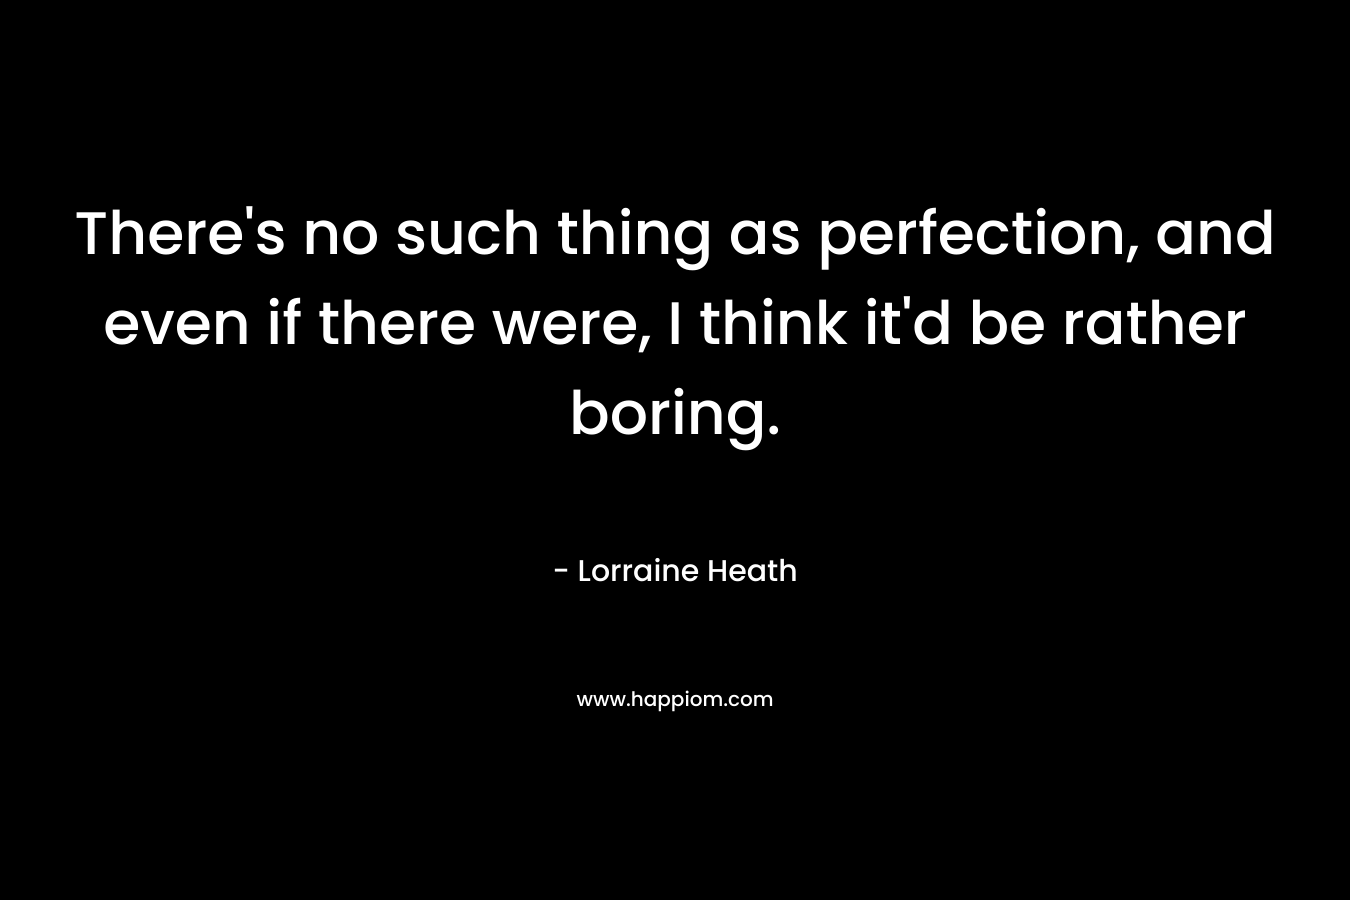 There's no such thing as perfection, and even if there were, I think it'd be rather boring.